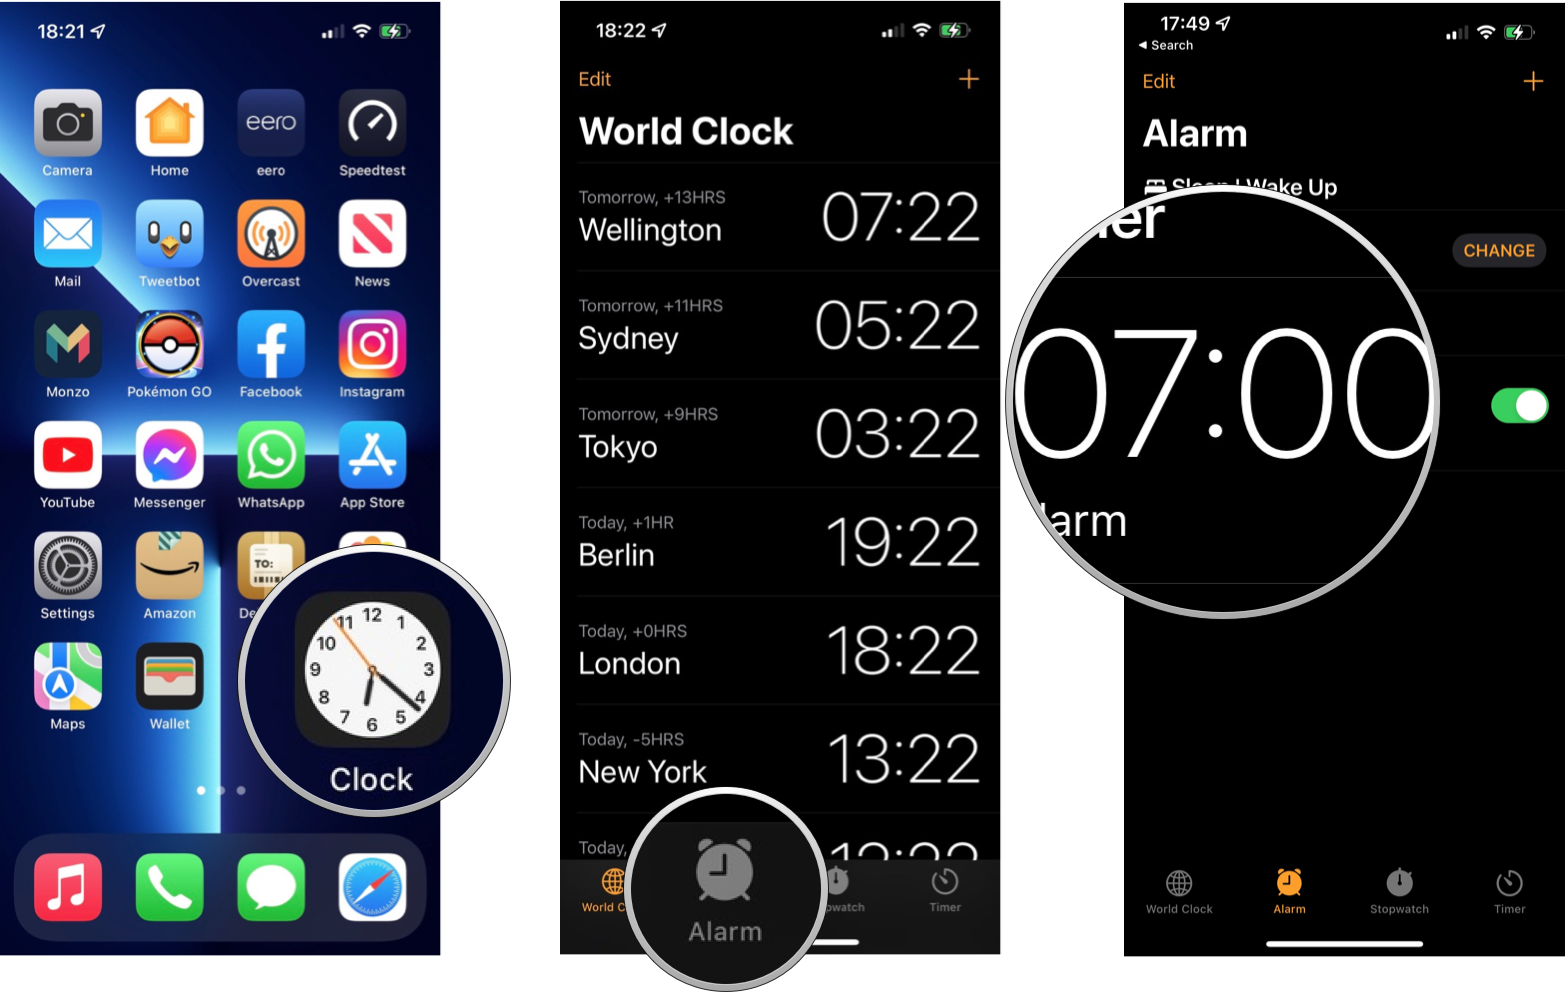 How to set a custom alarm sound by showing steps: Launch the Clock app and tap on the Alarm tab. Tap on the alarm you wish to change